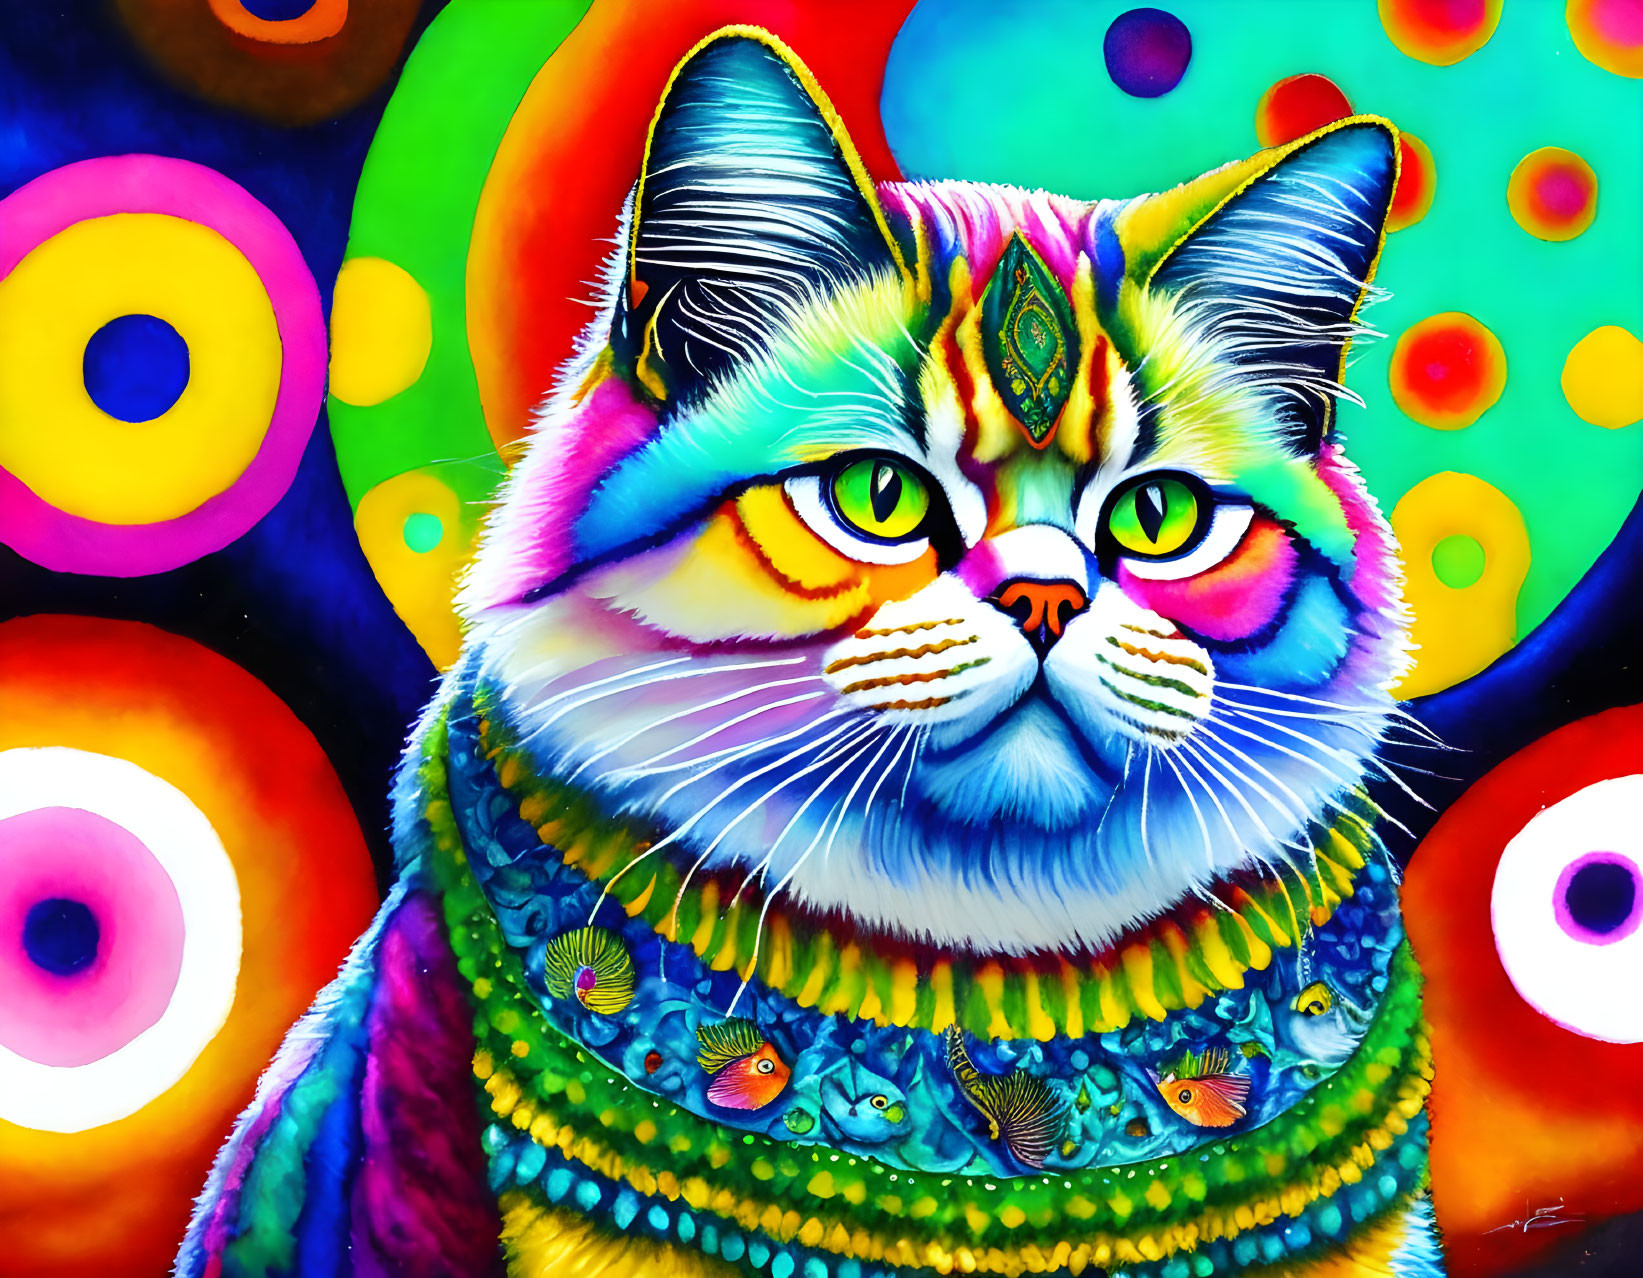 Colorful Cat Painting with Psychedelic Patterns and Yellow Eyes